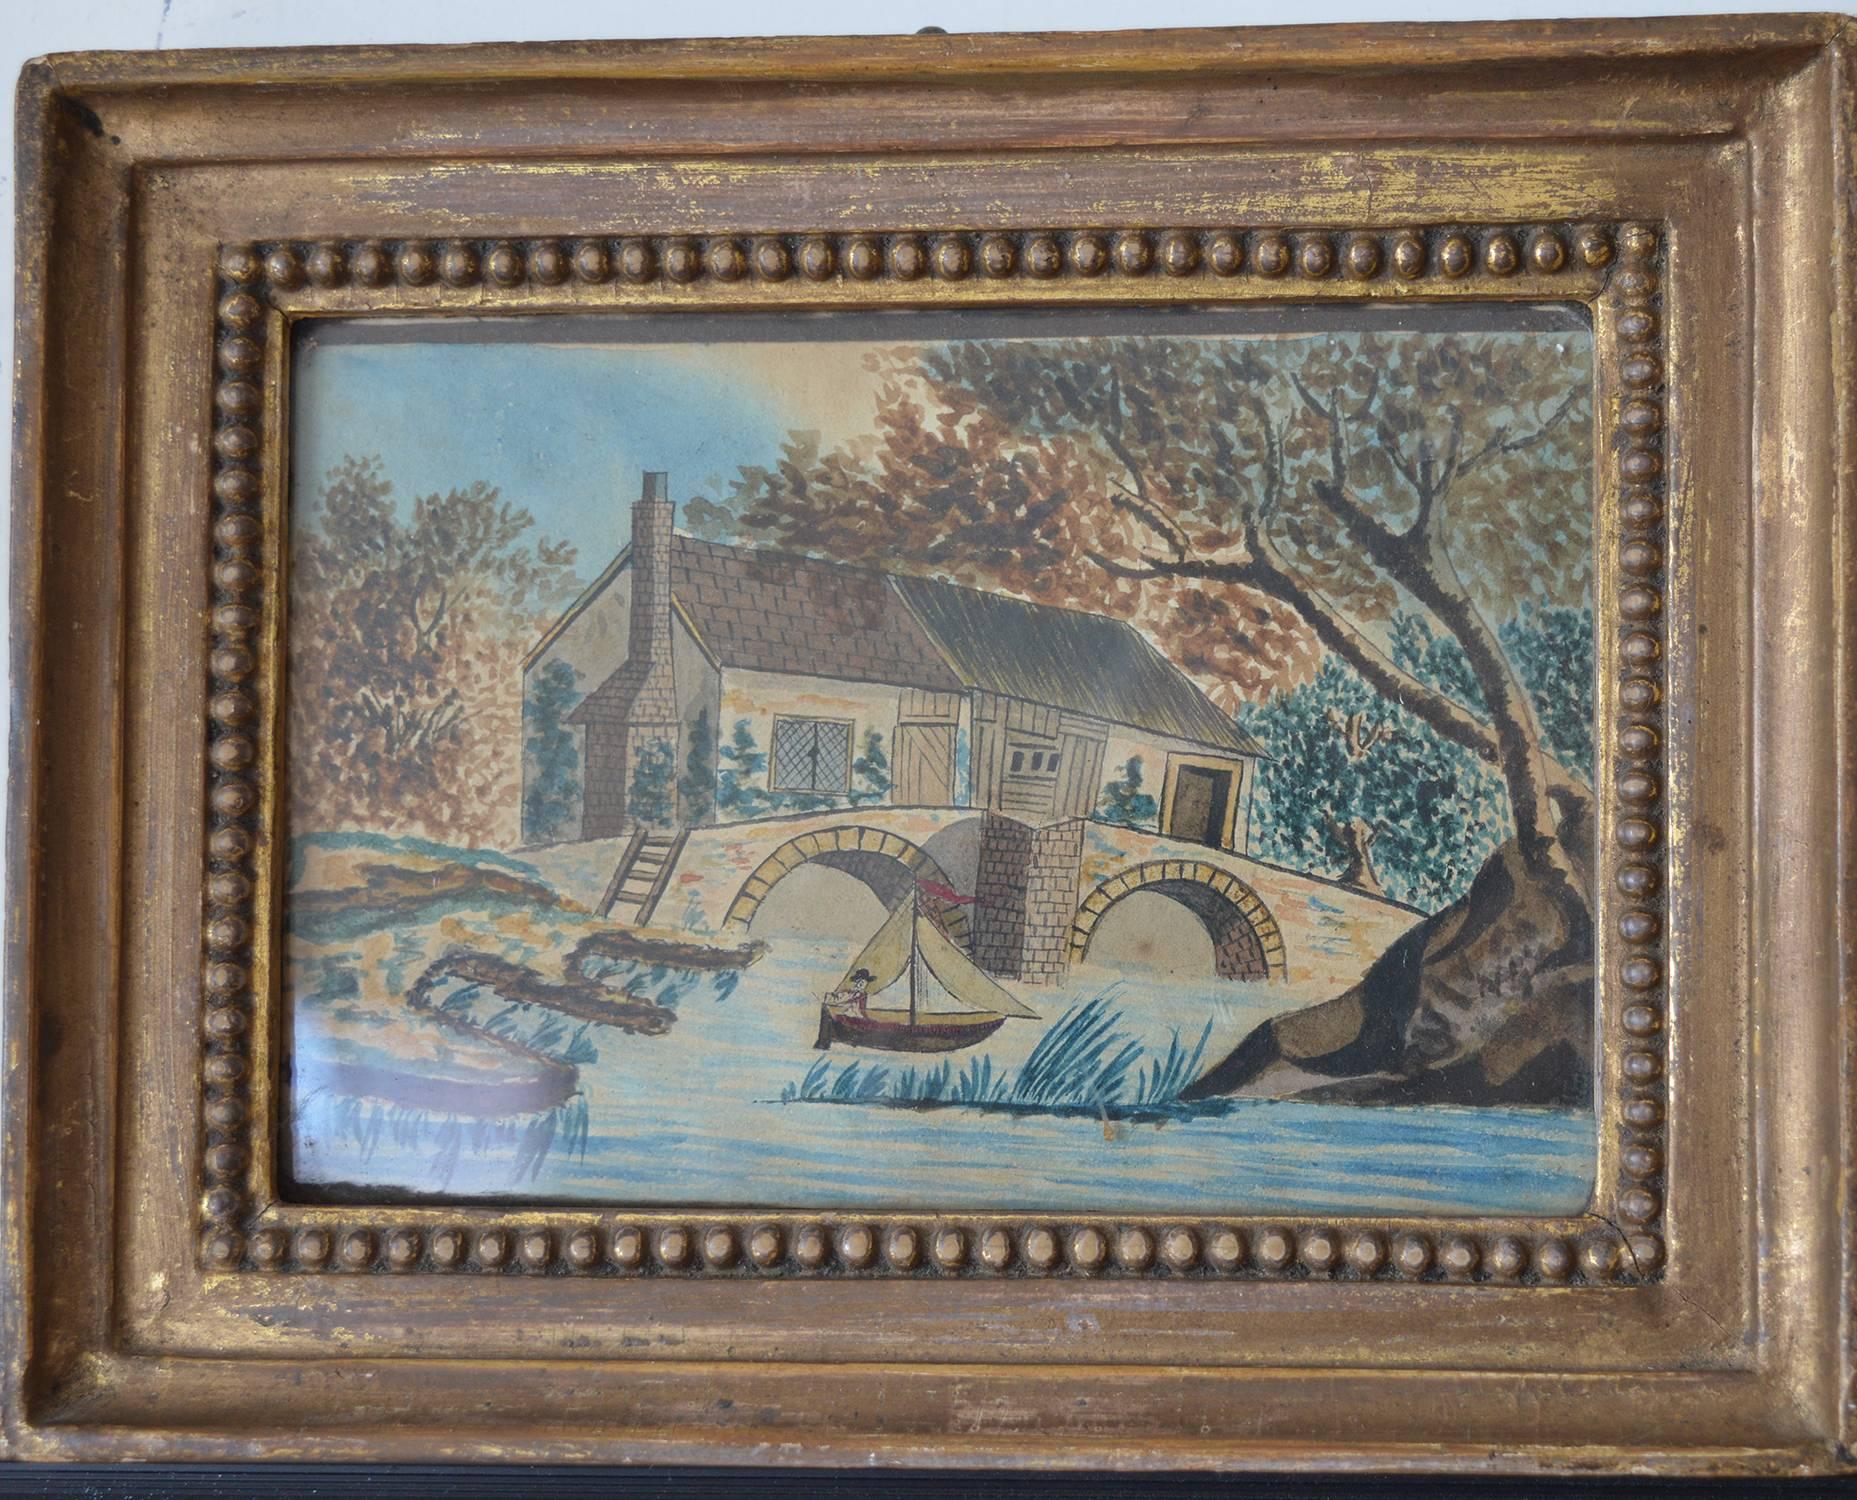 
Wonderful primitive or naive image in muted colors.

One of a set of three.

Gouache on paper. Artist unknown.

Original distressed gilt frame.

Untouched at the back.